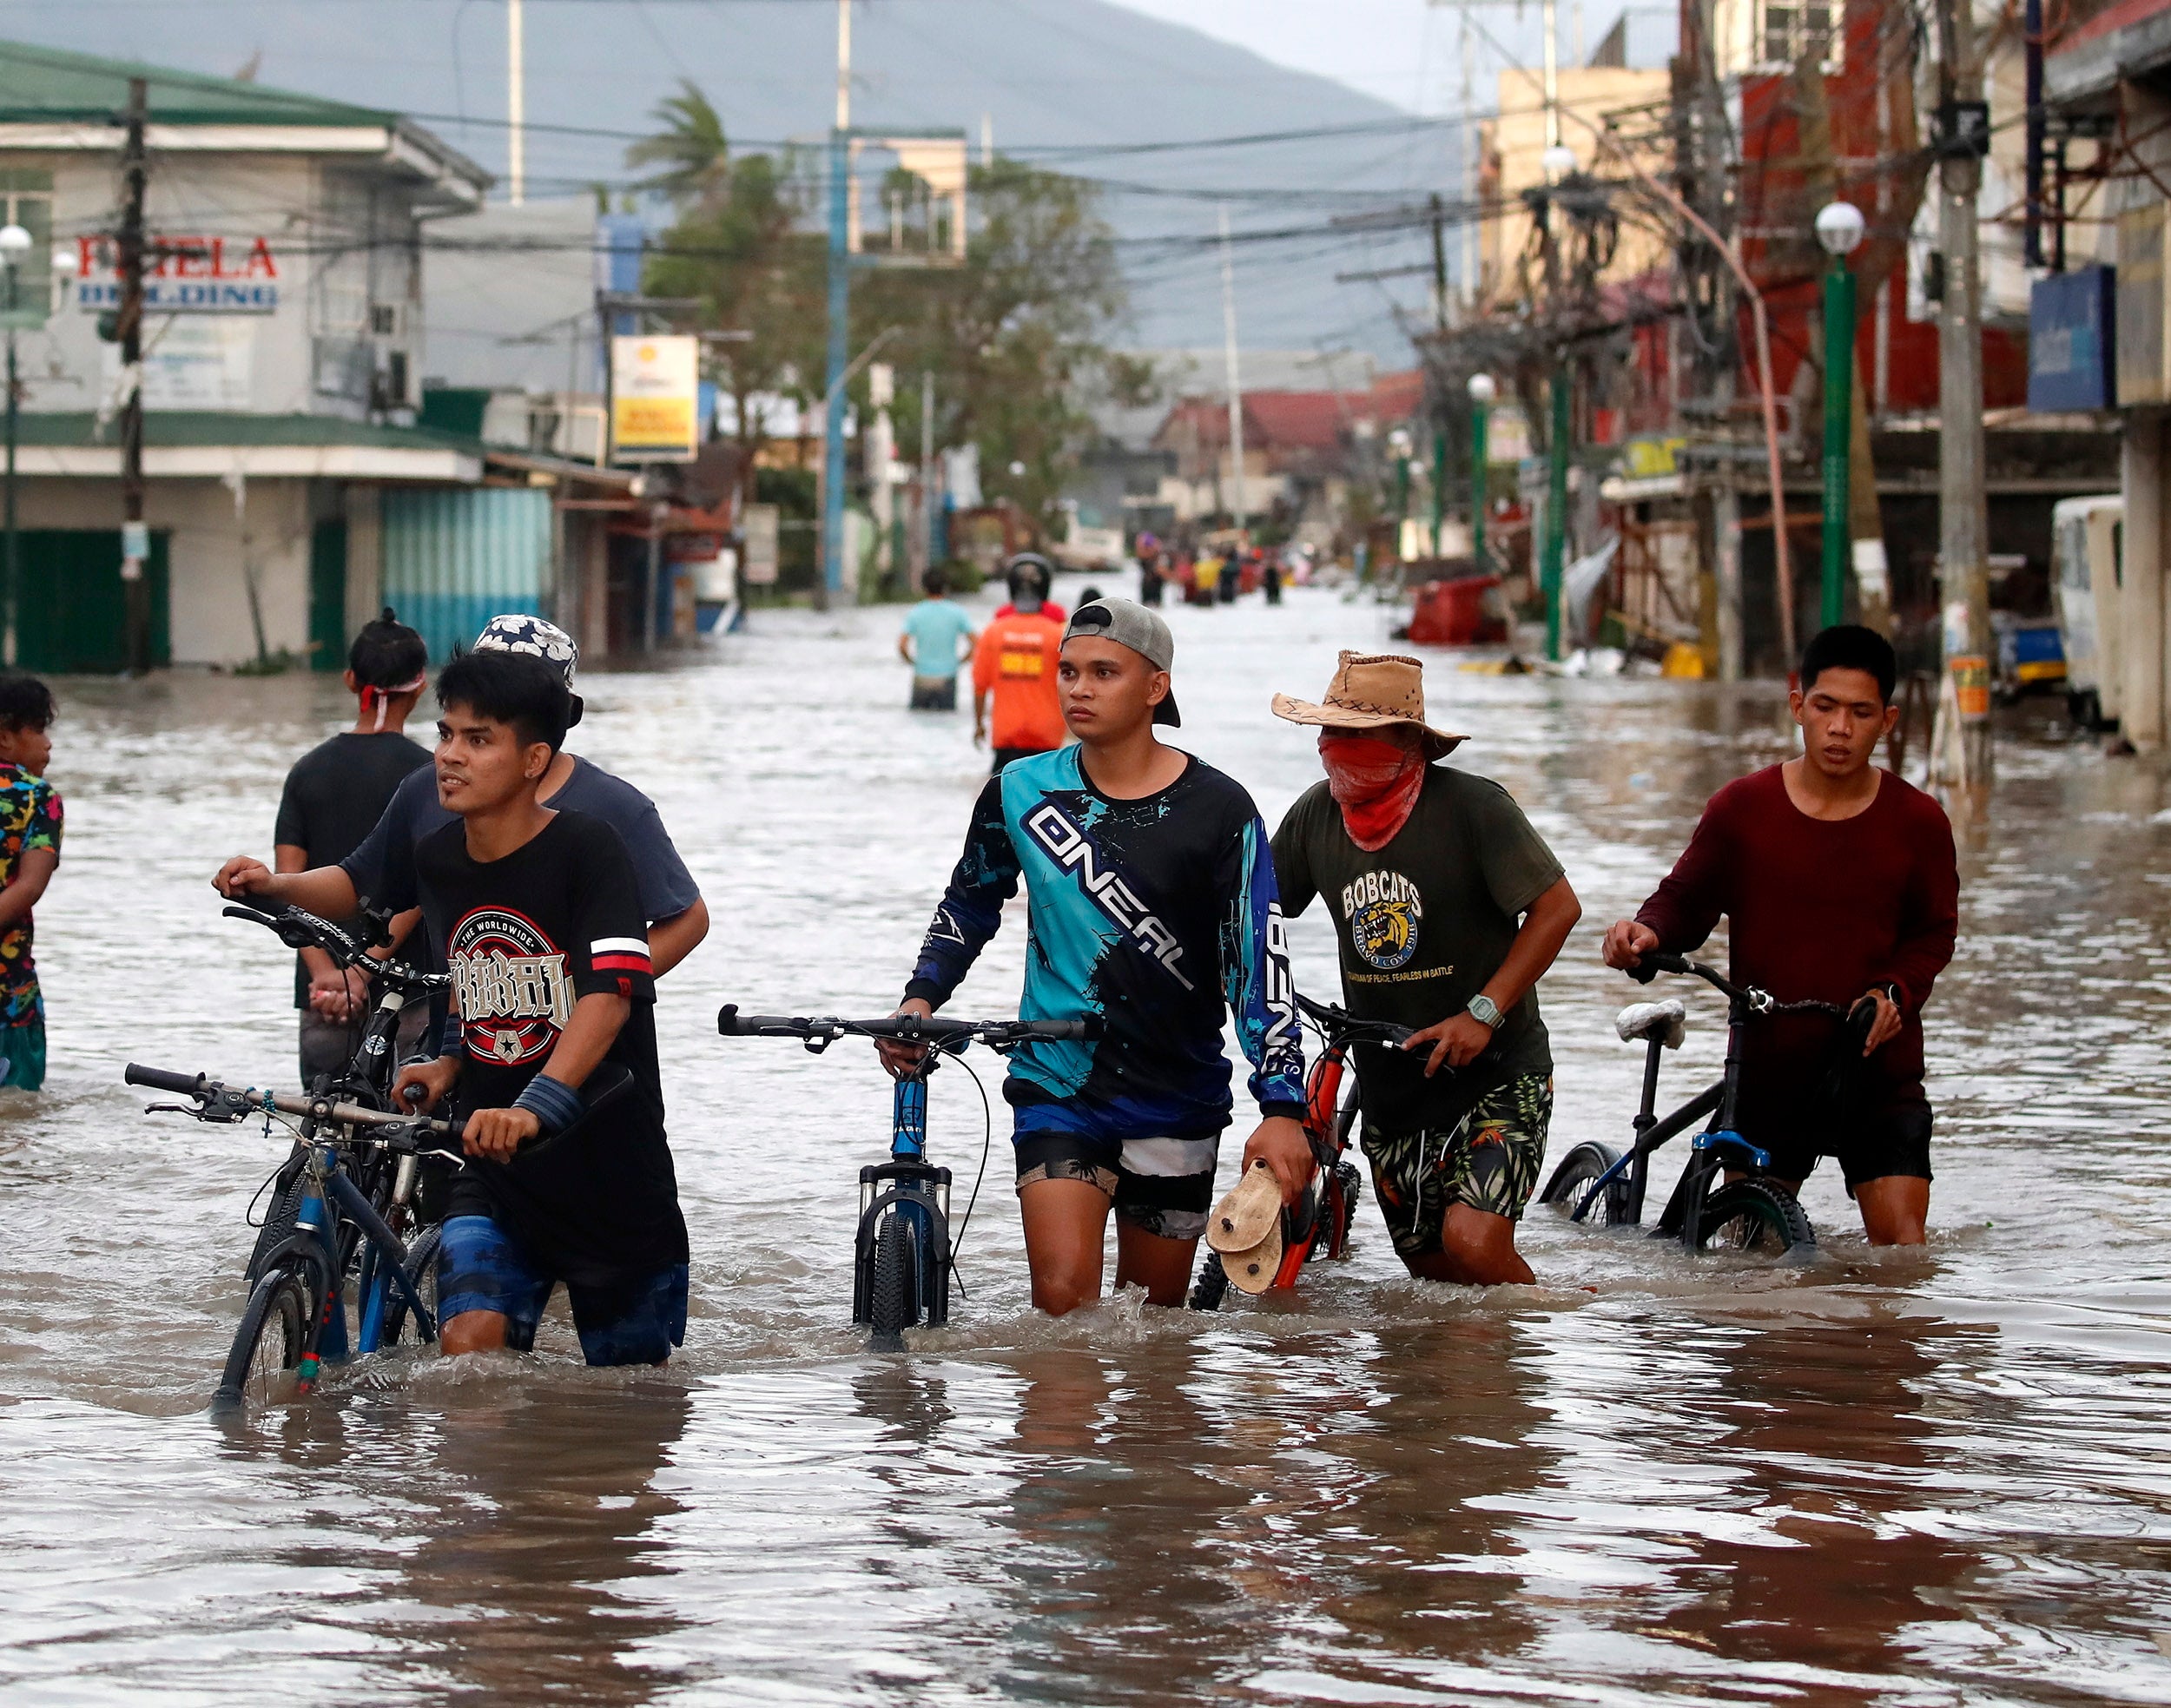 Filipino villagers wade along a flooded road in the typhoon-hit town of Nabua, Camarines Sur, Philippines